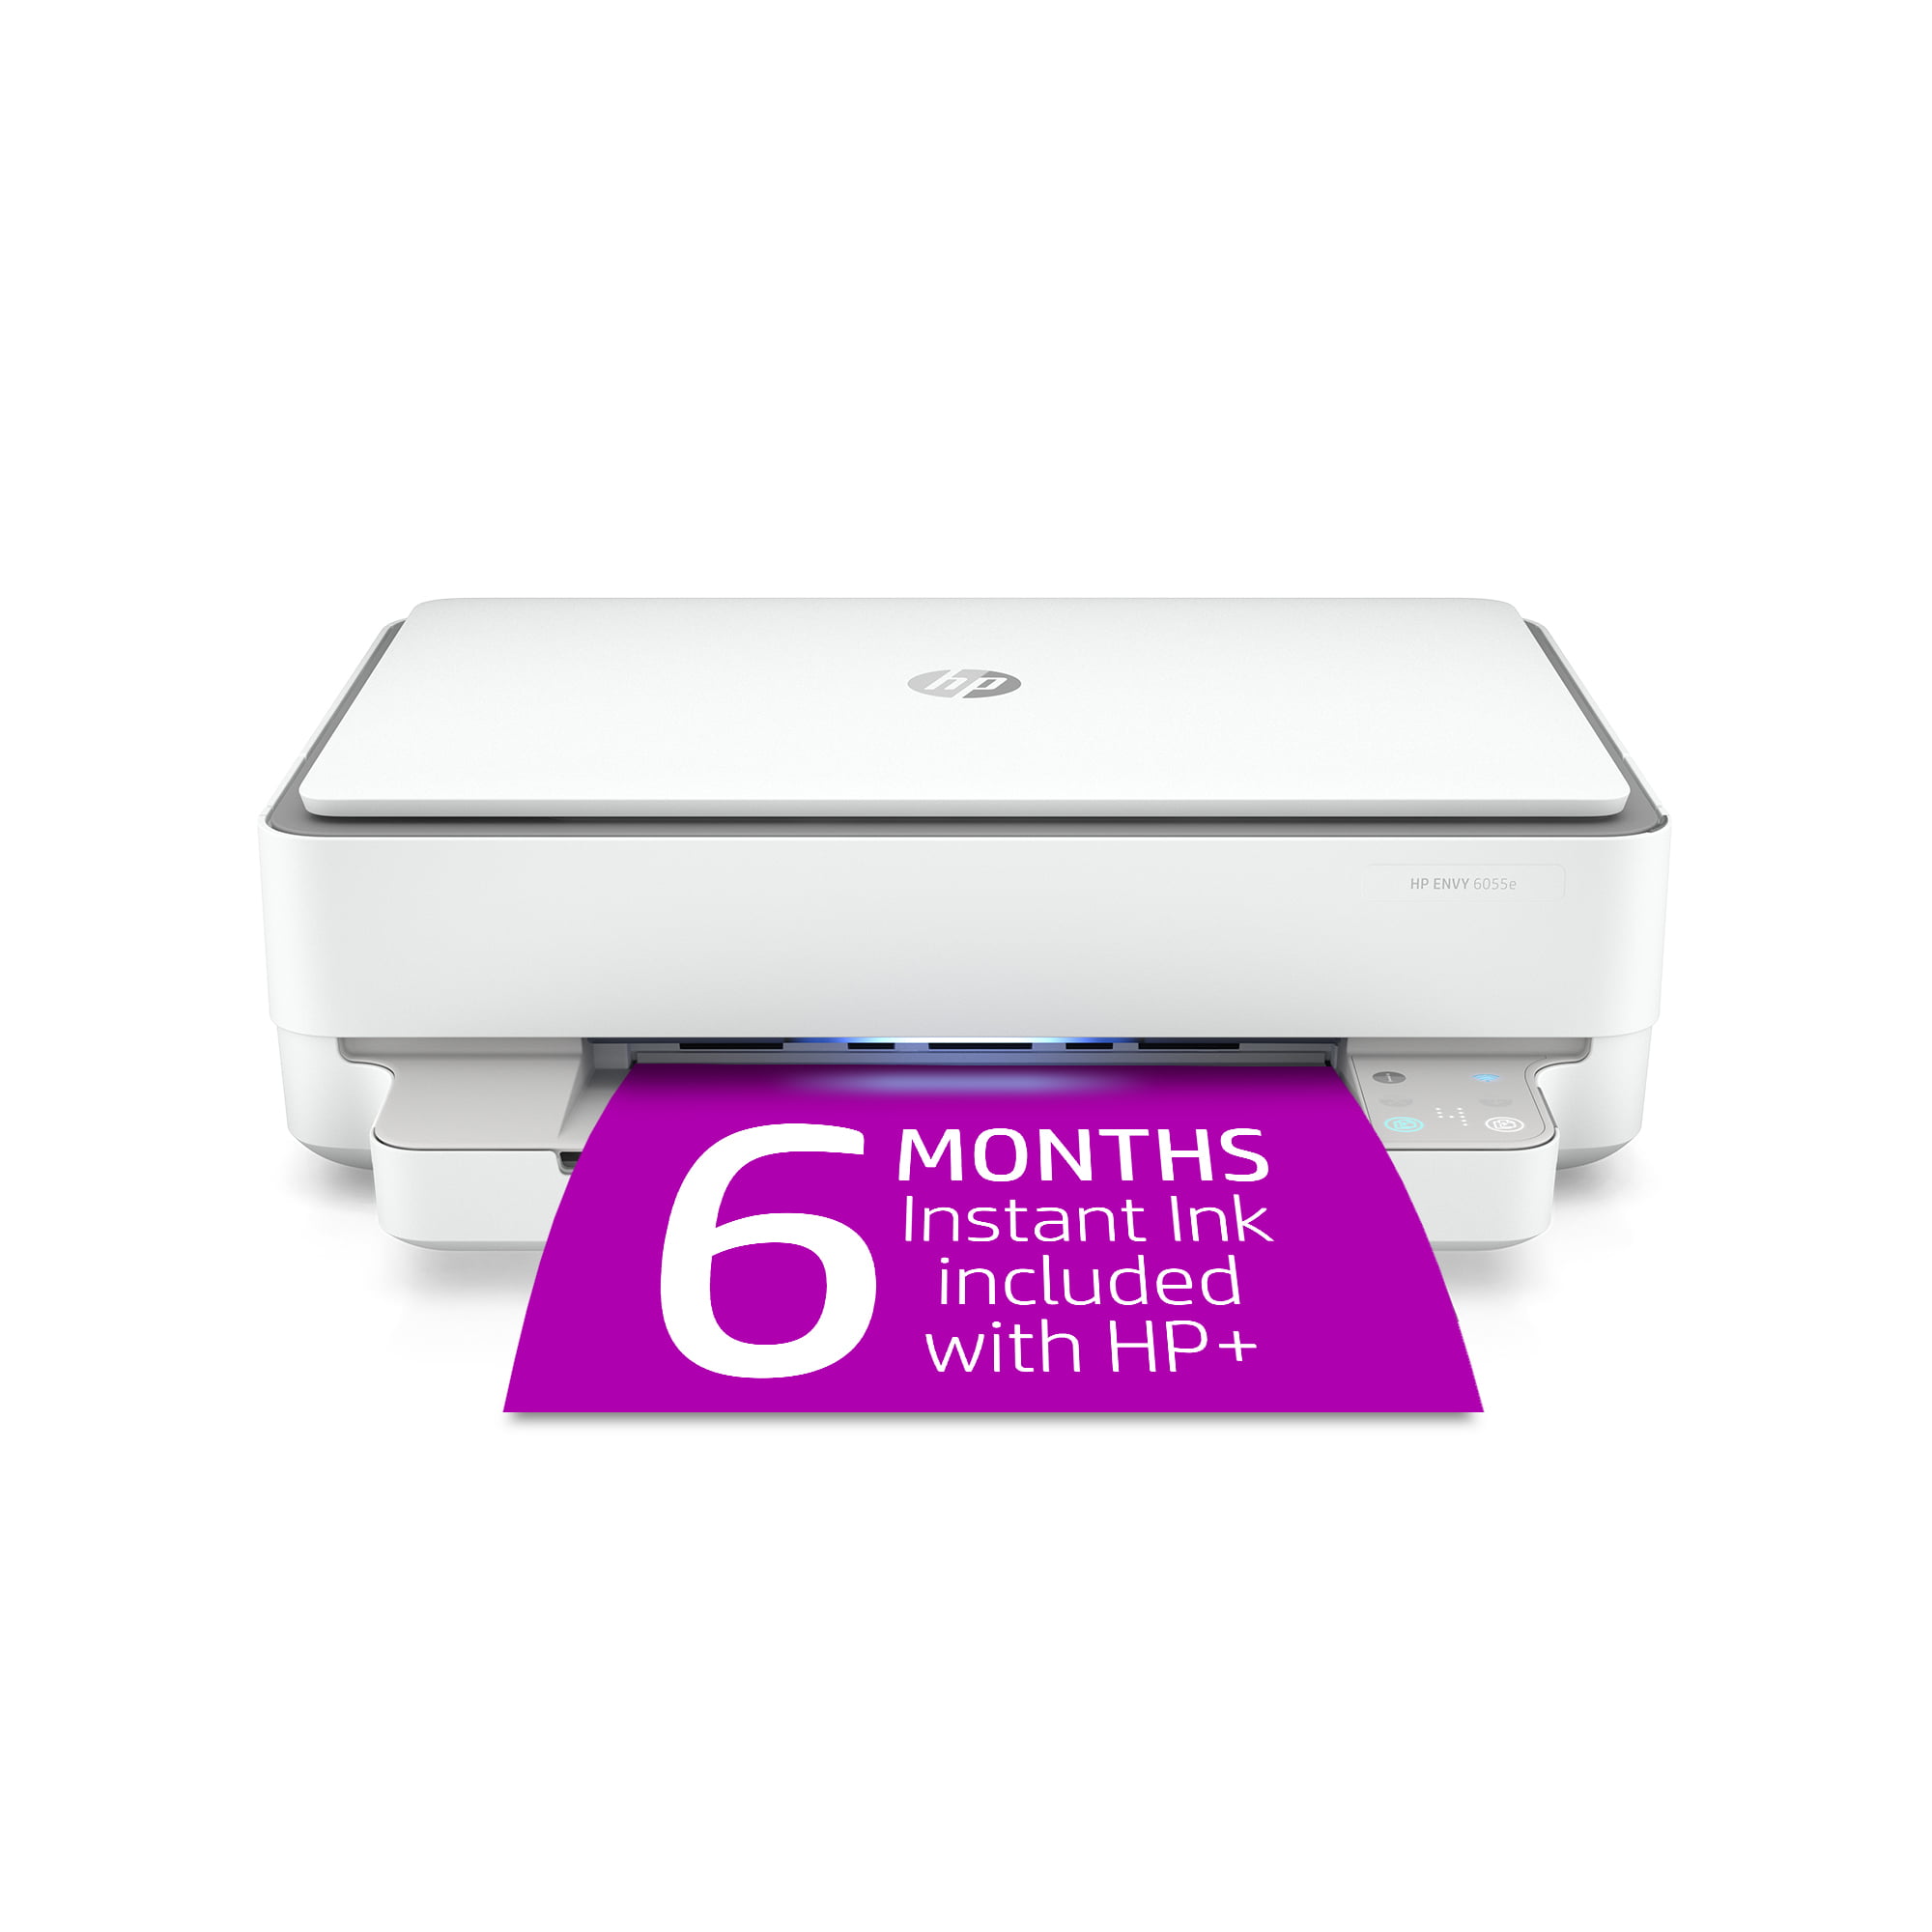 6055e All-in-One Wireless Color Inkjet - 6 months free Instant Ink with - Walmart.com